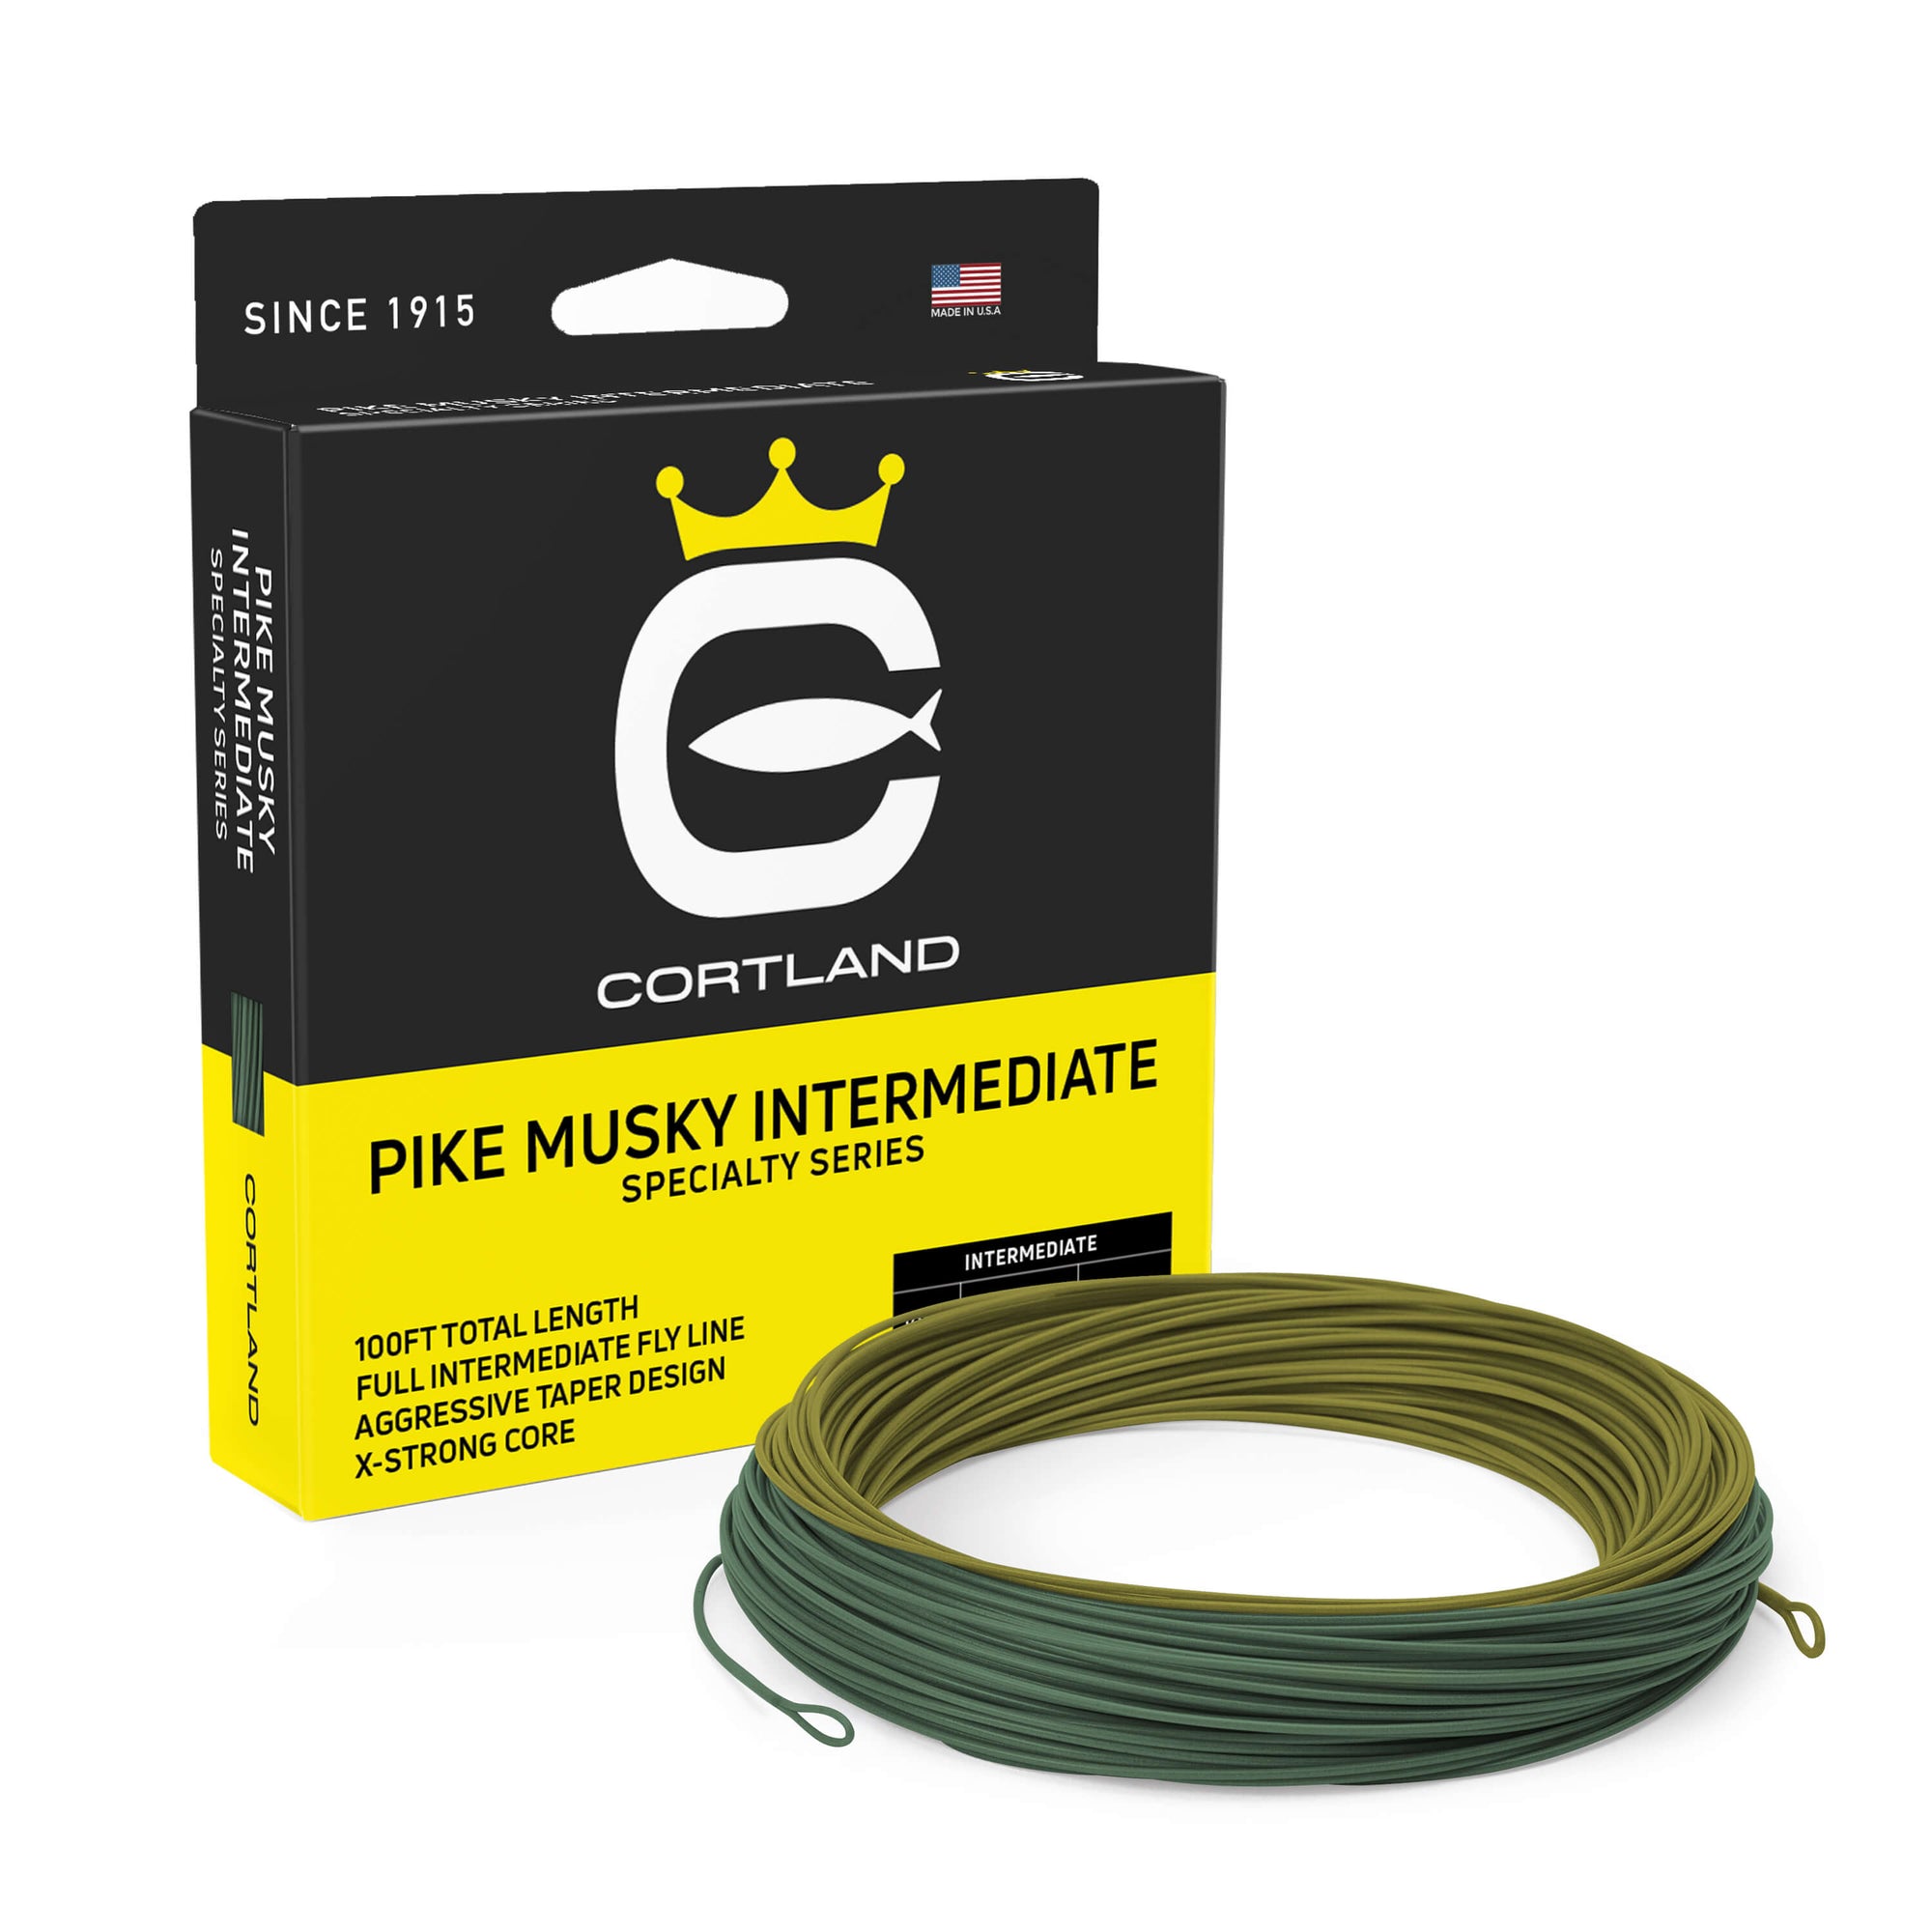 Pike Musky Intermediate Fly Line Box and Coil. The coil is olive and green. The box has the Cortland logo and is black and yellow.